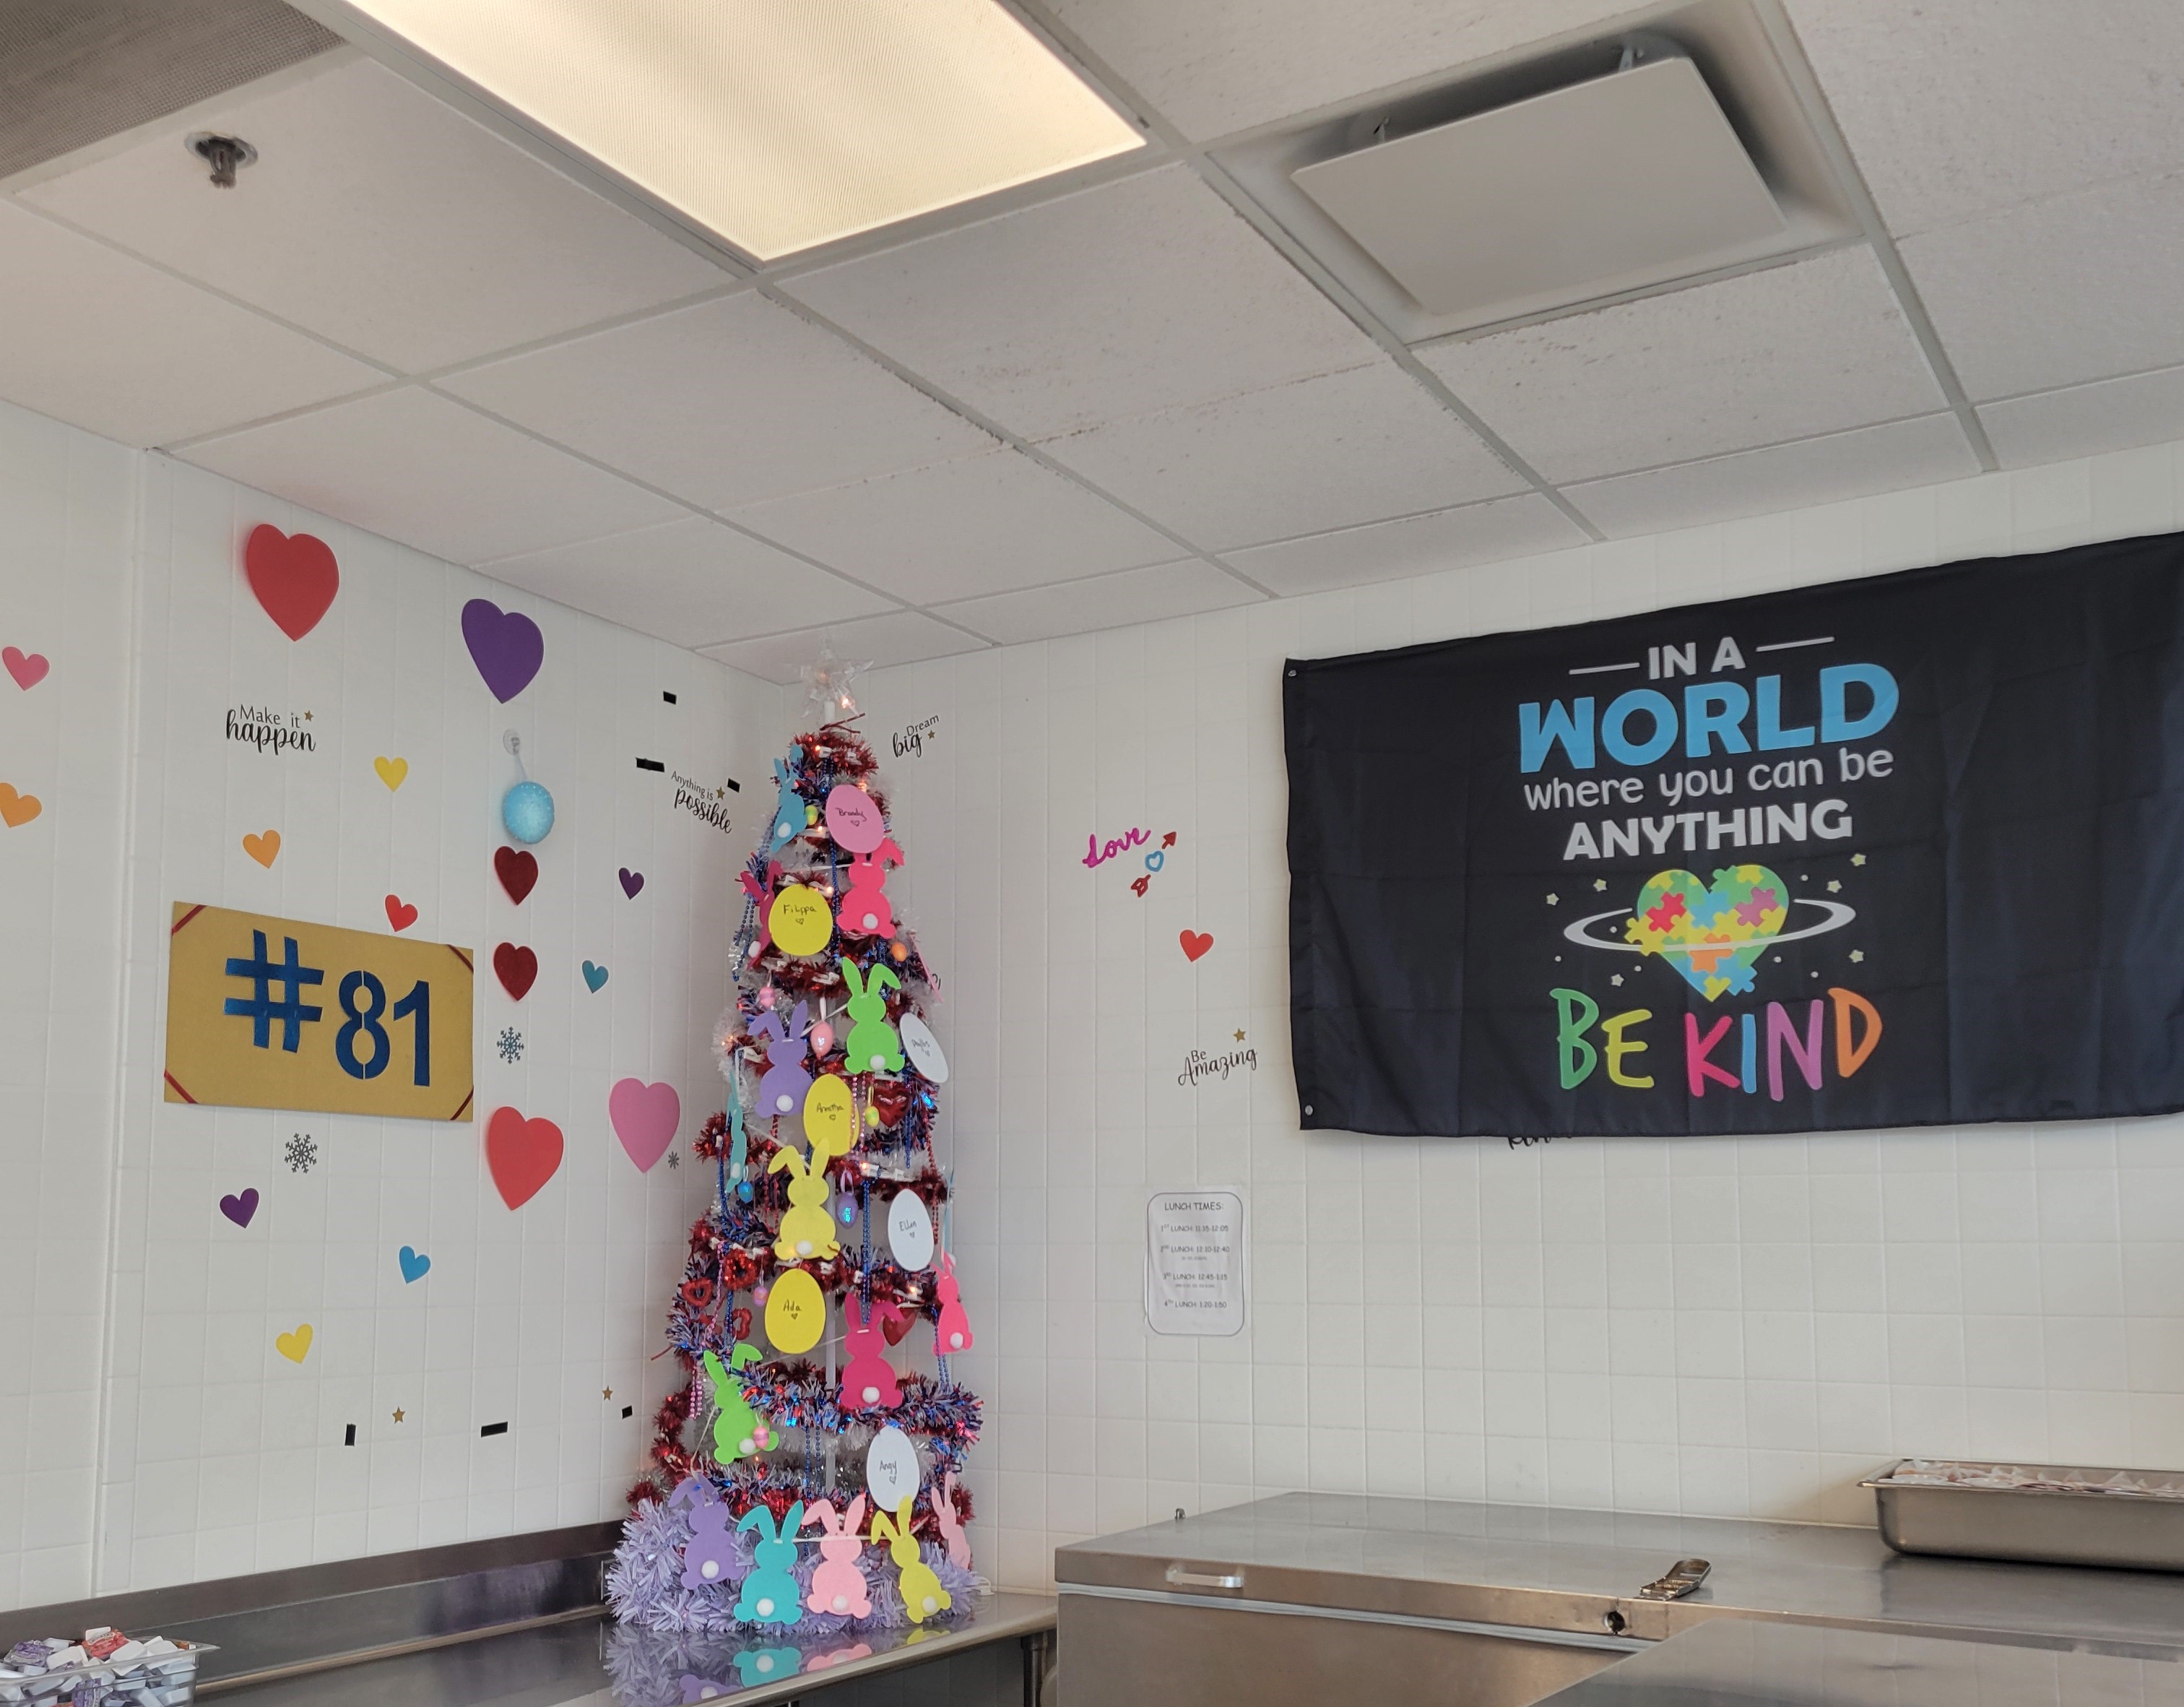 School 81 cafeteria decorated for Valentine's and Easter